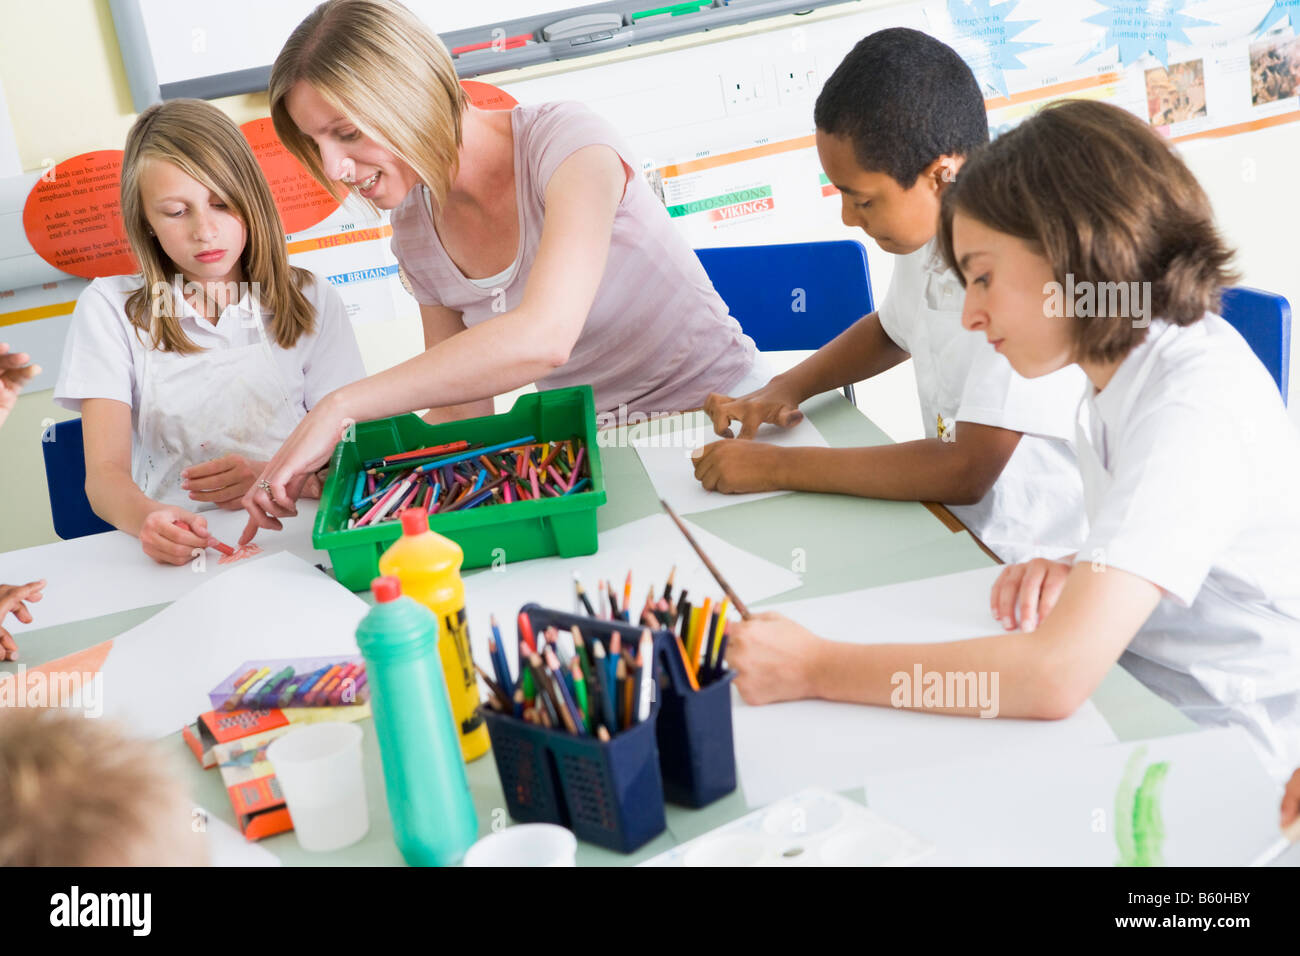 Students in art class with teacher Stock Photo